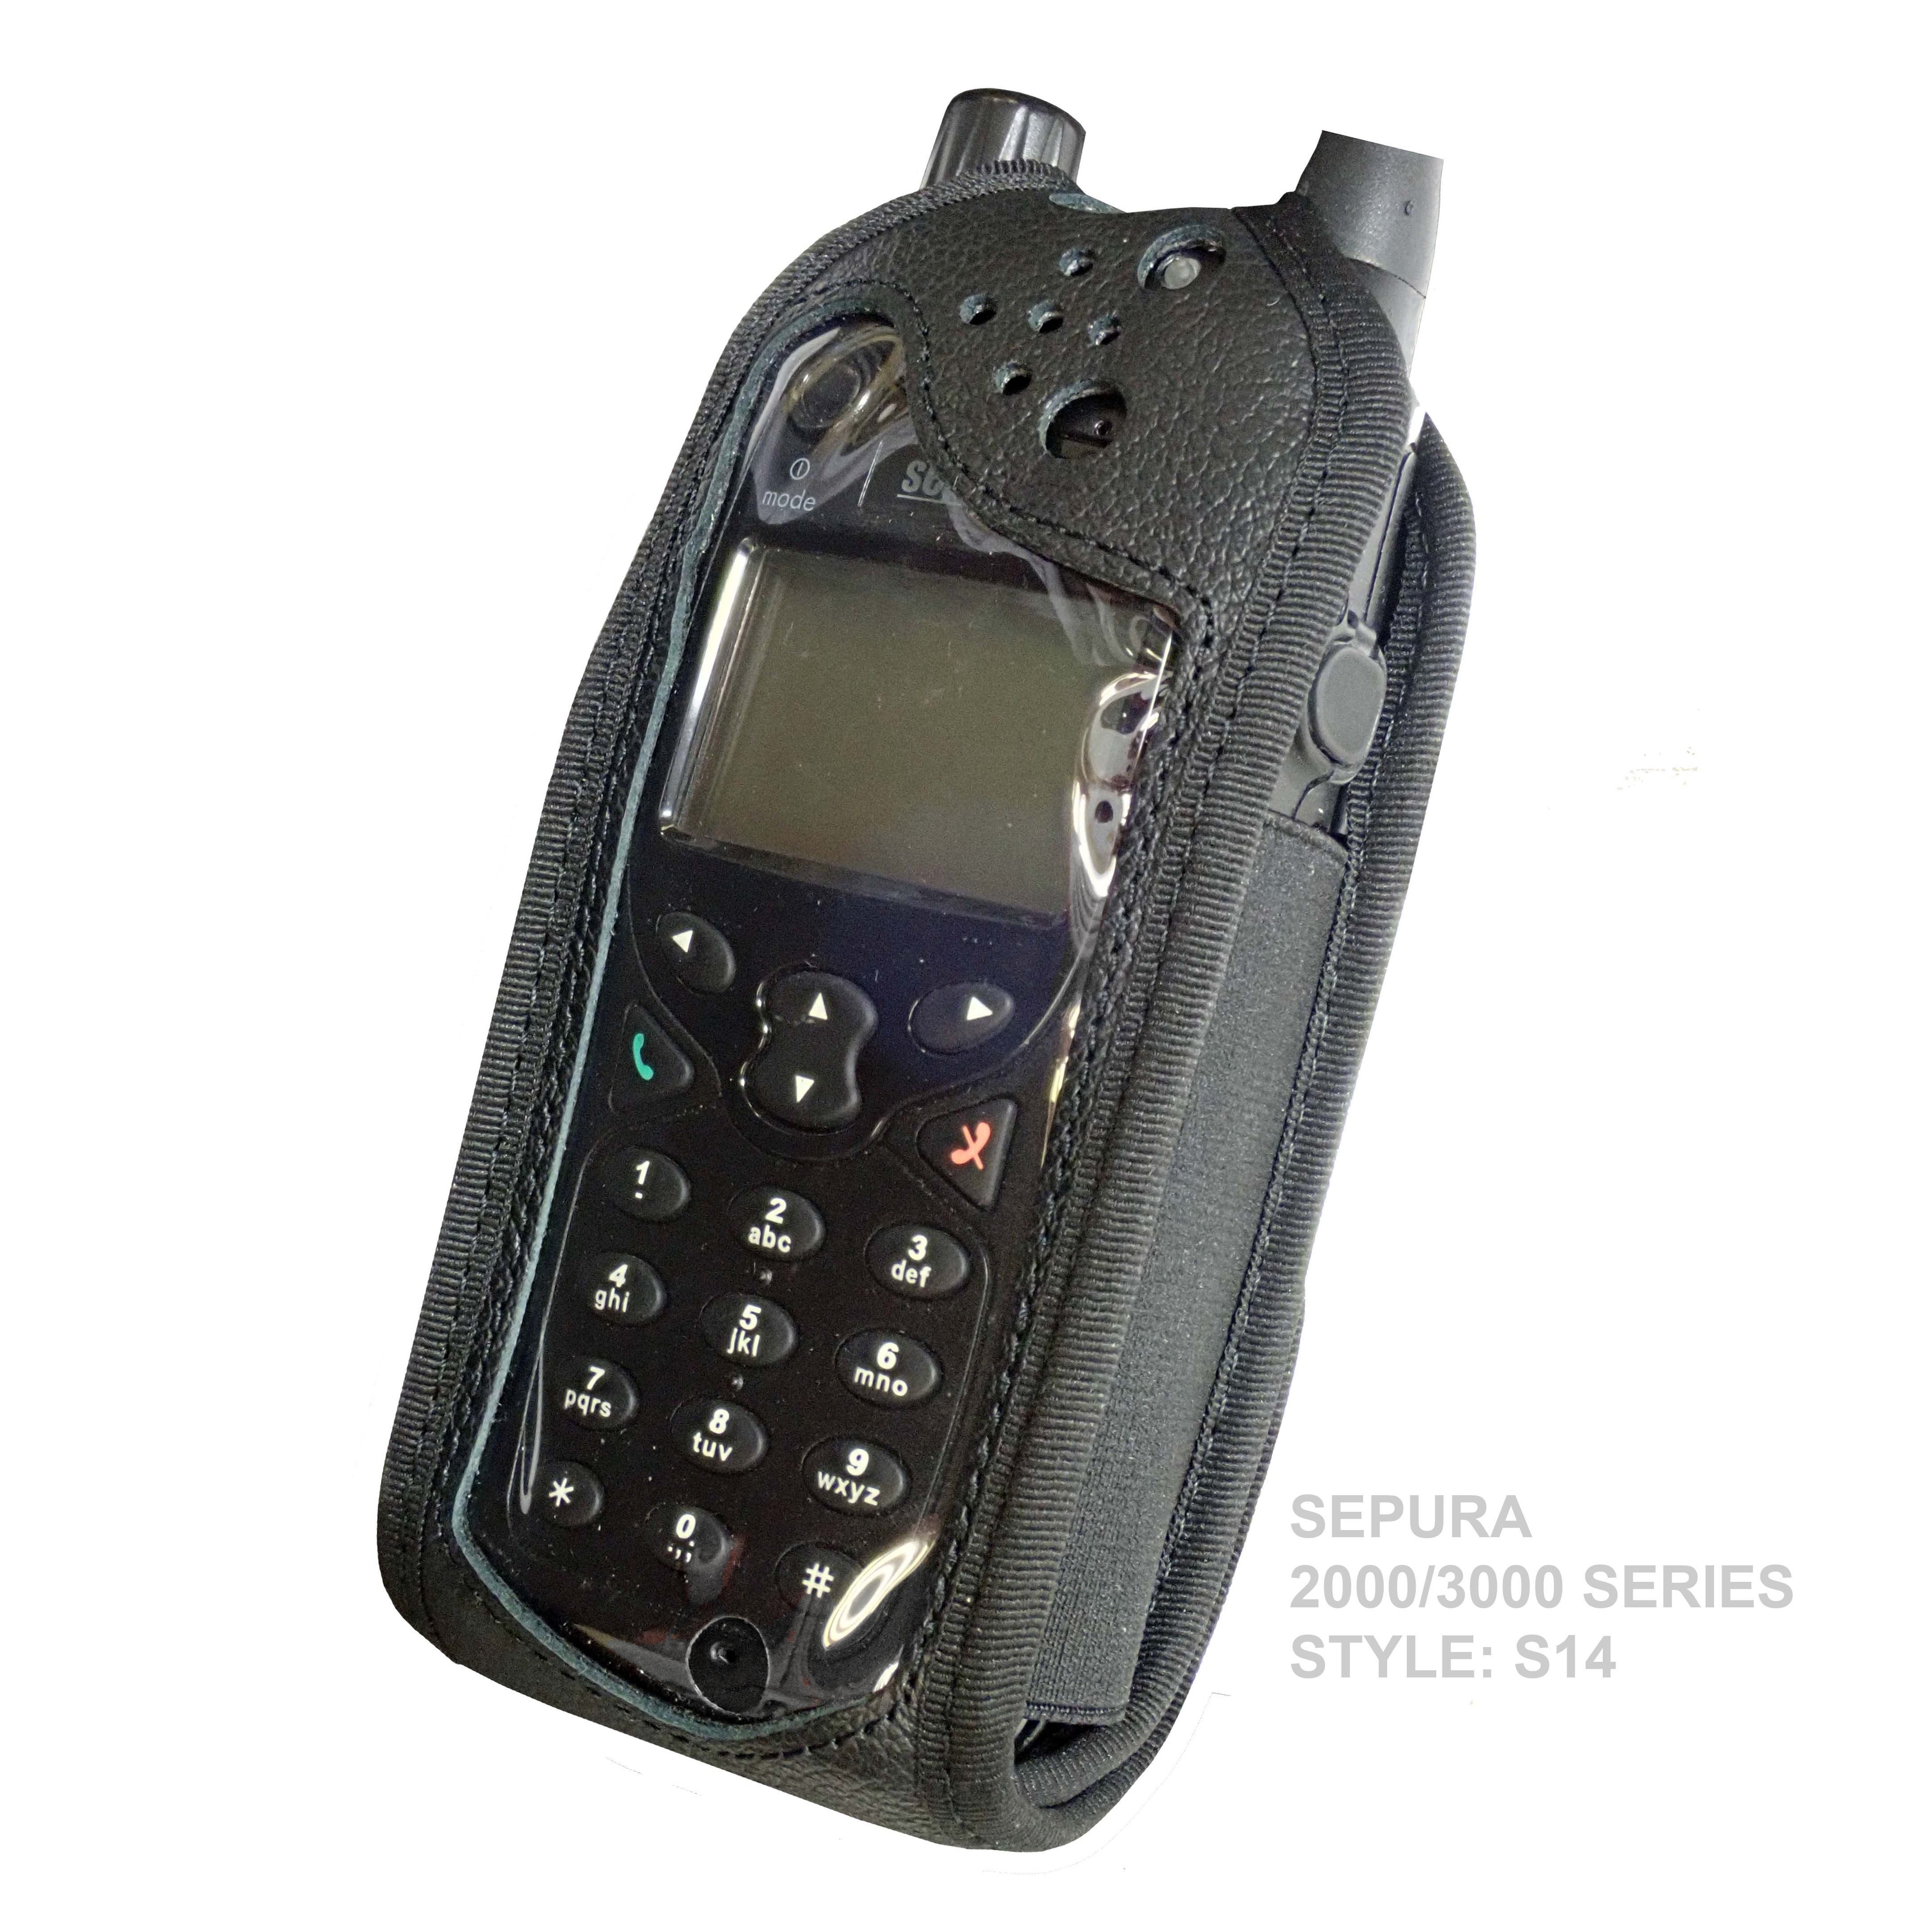 Sepura SRP2000 Tetra leather radio case with Click-On